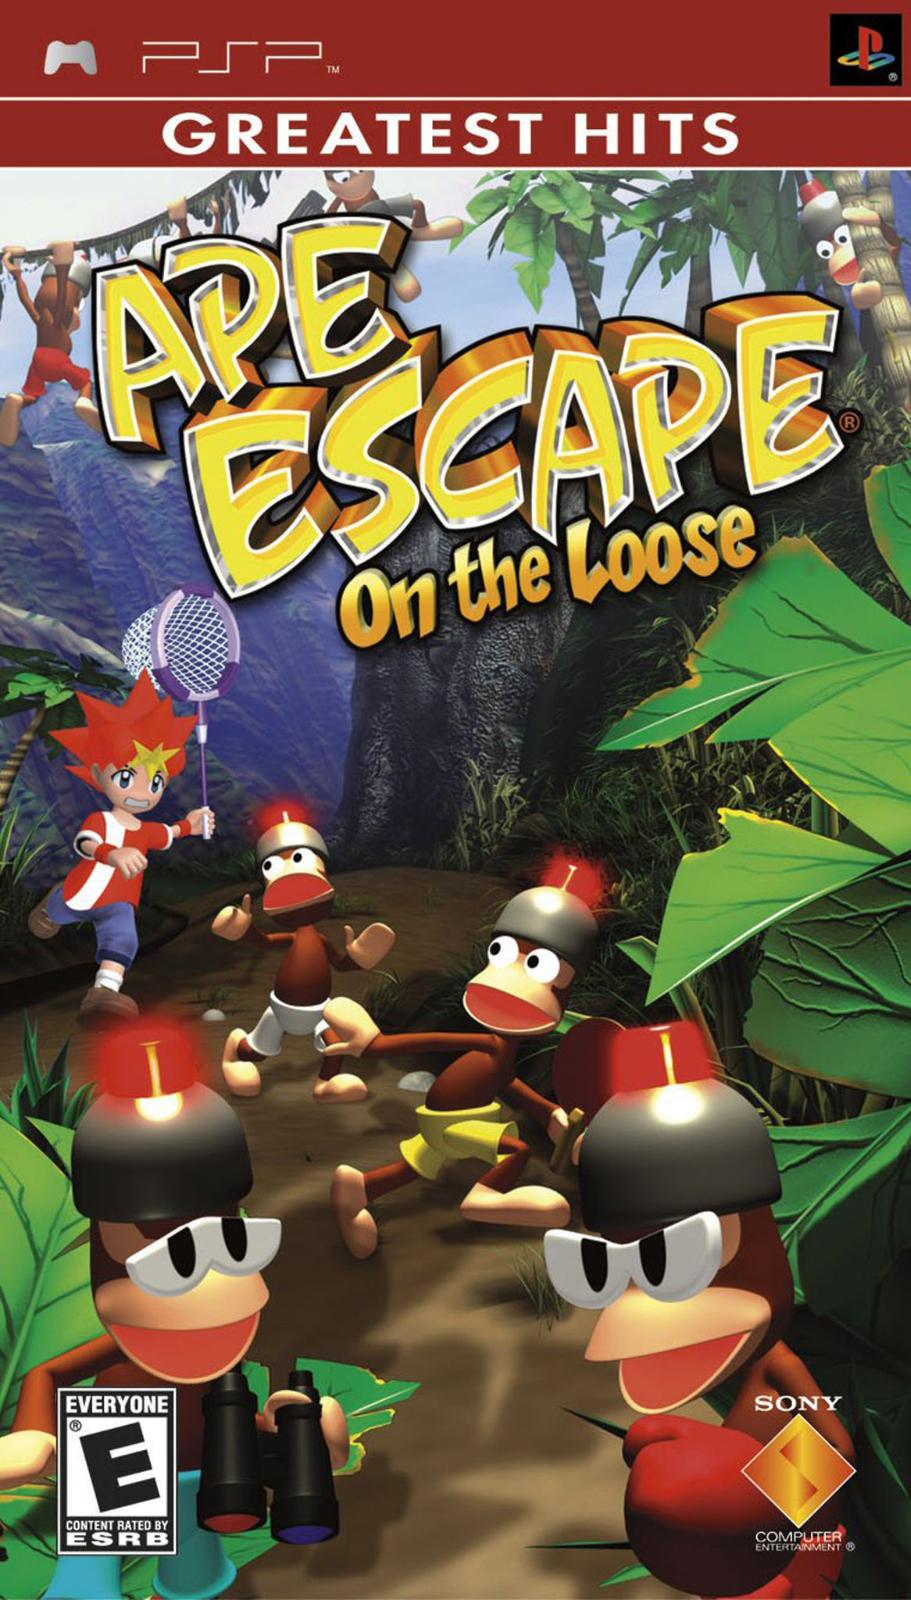 Ape Escape On The Loose [Greatest Hits] PSP